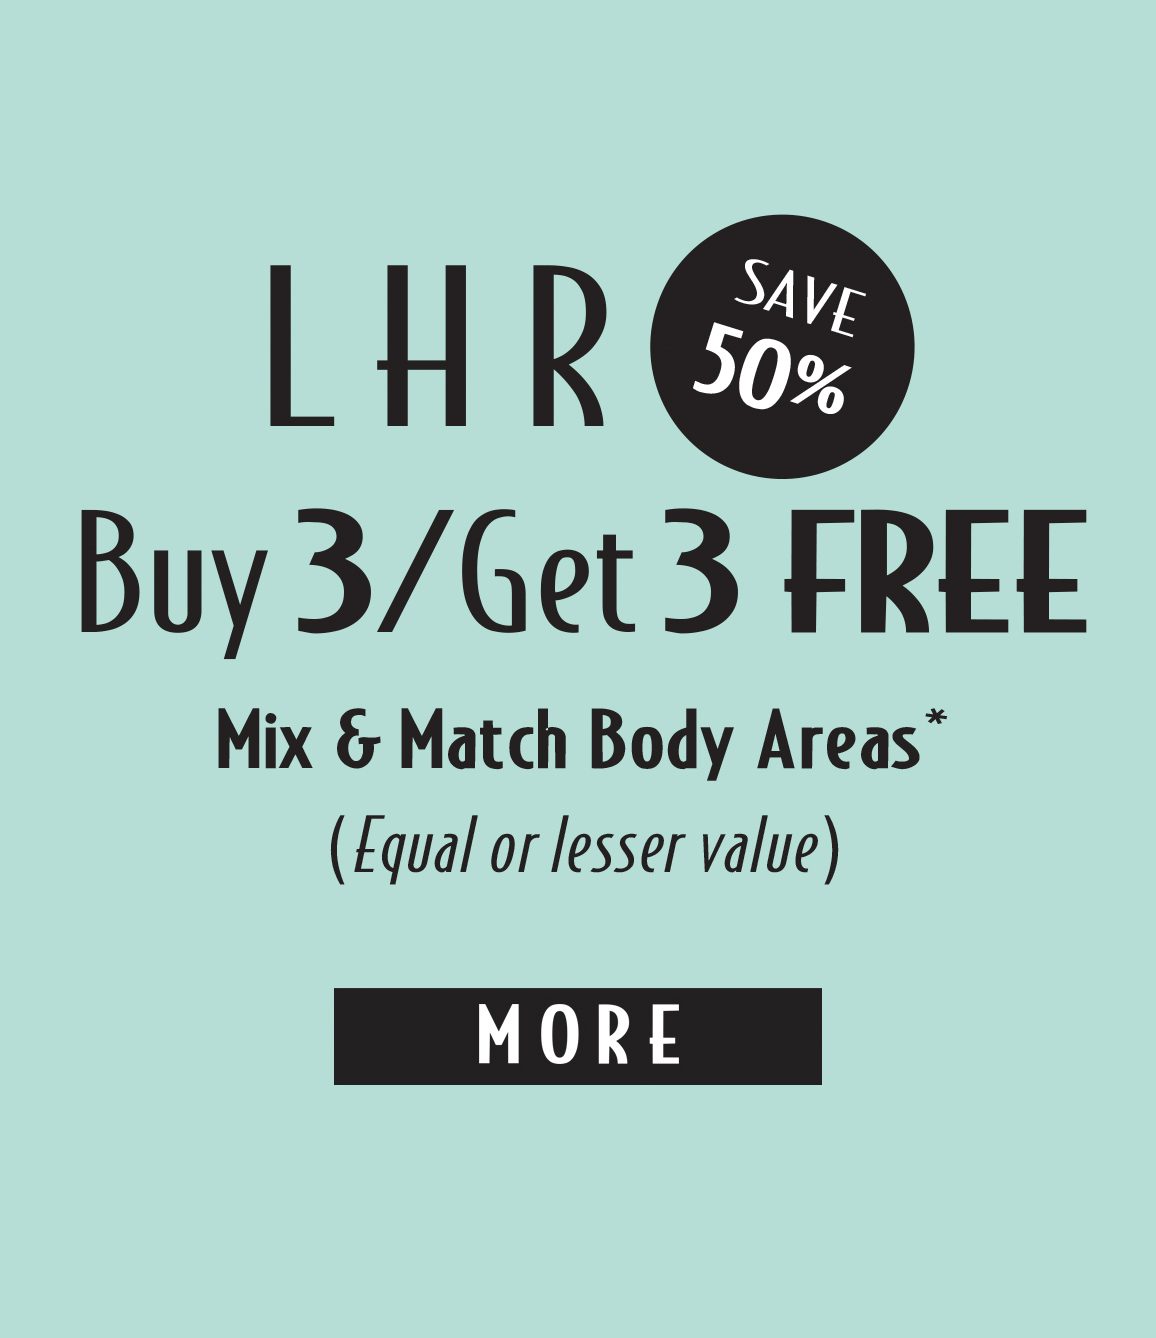 LHR - Buy 3 & Get 3 FREE - Mix and Match